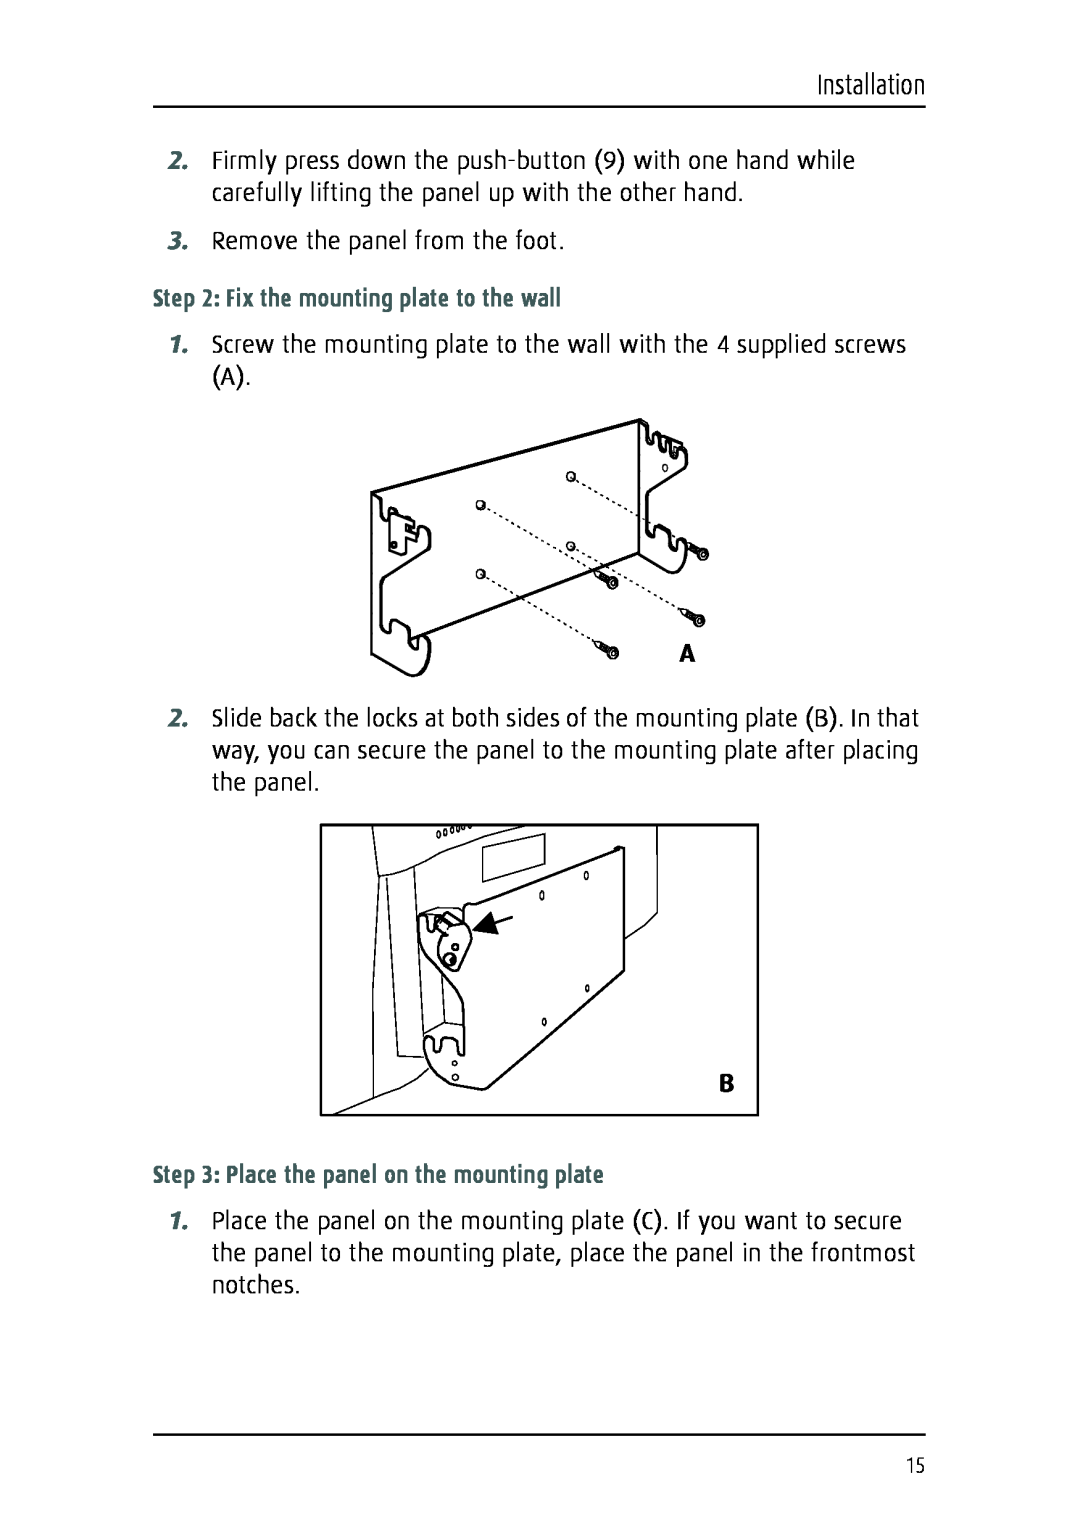 Barco 1219 user manual Fix the mounting plate to the wall, Place the panel on the mounting plate, Installation 